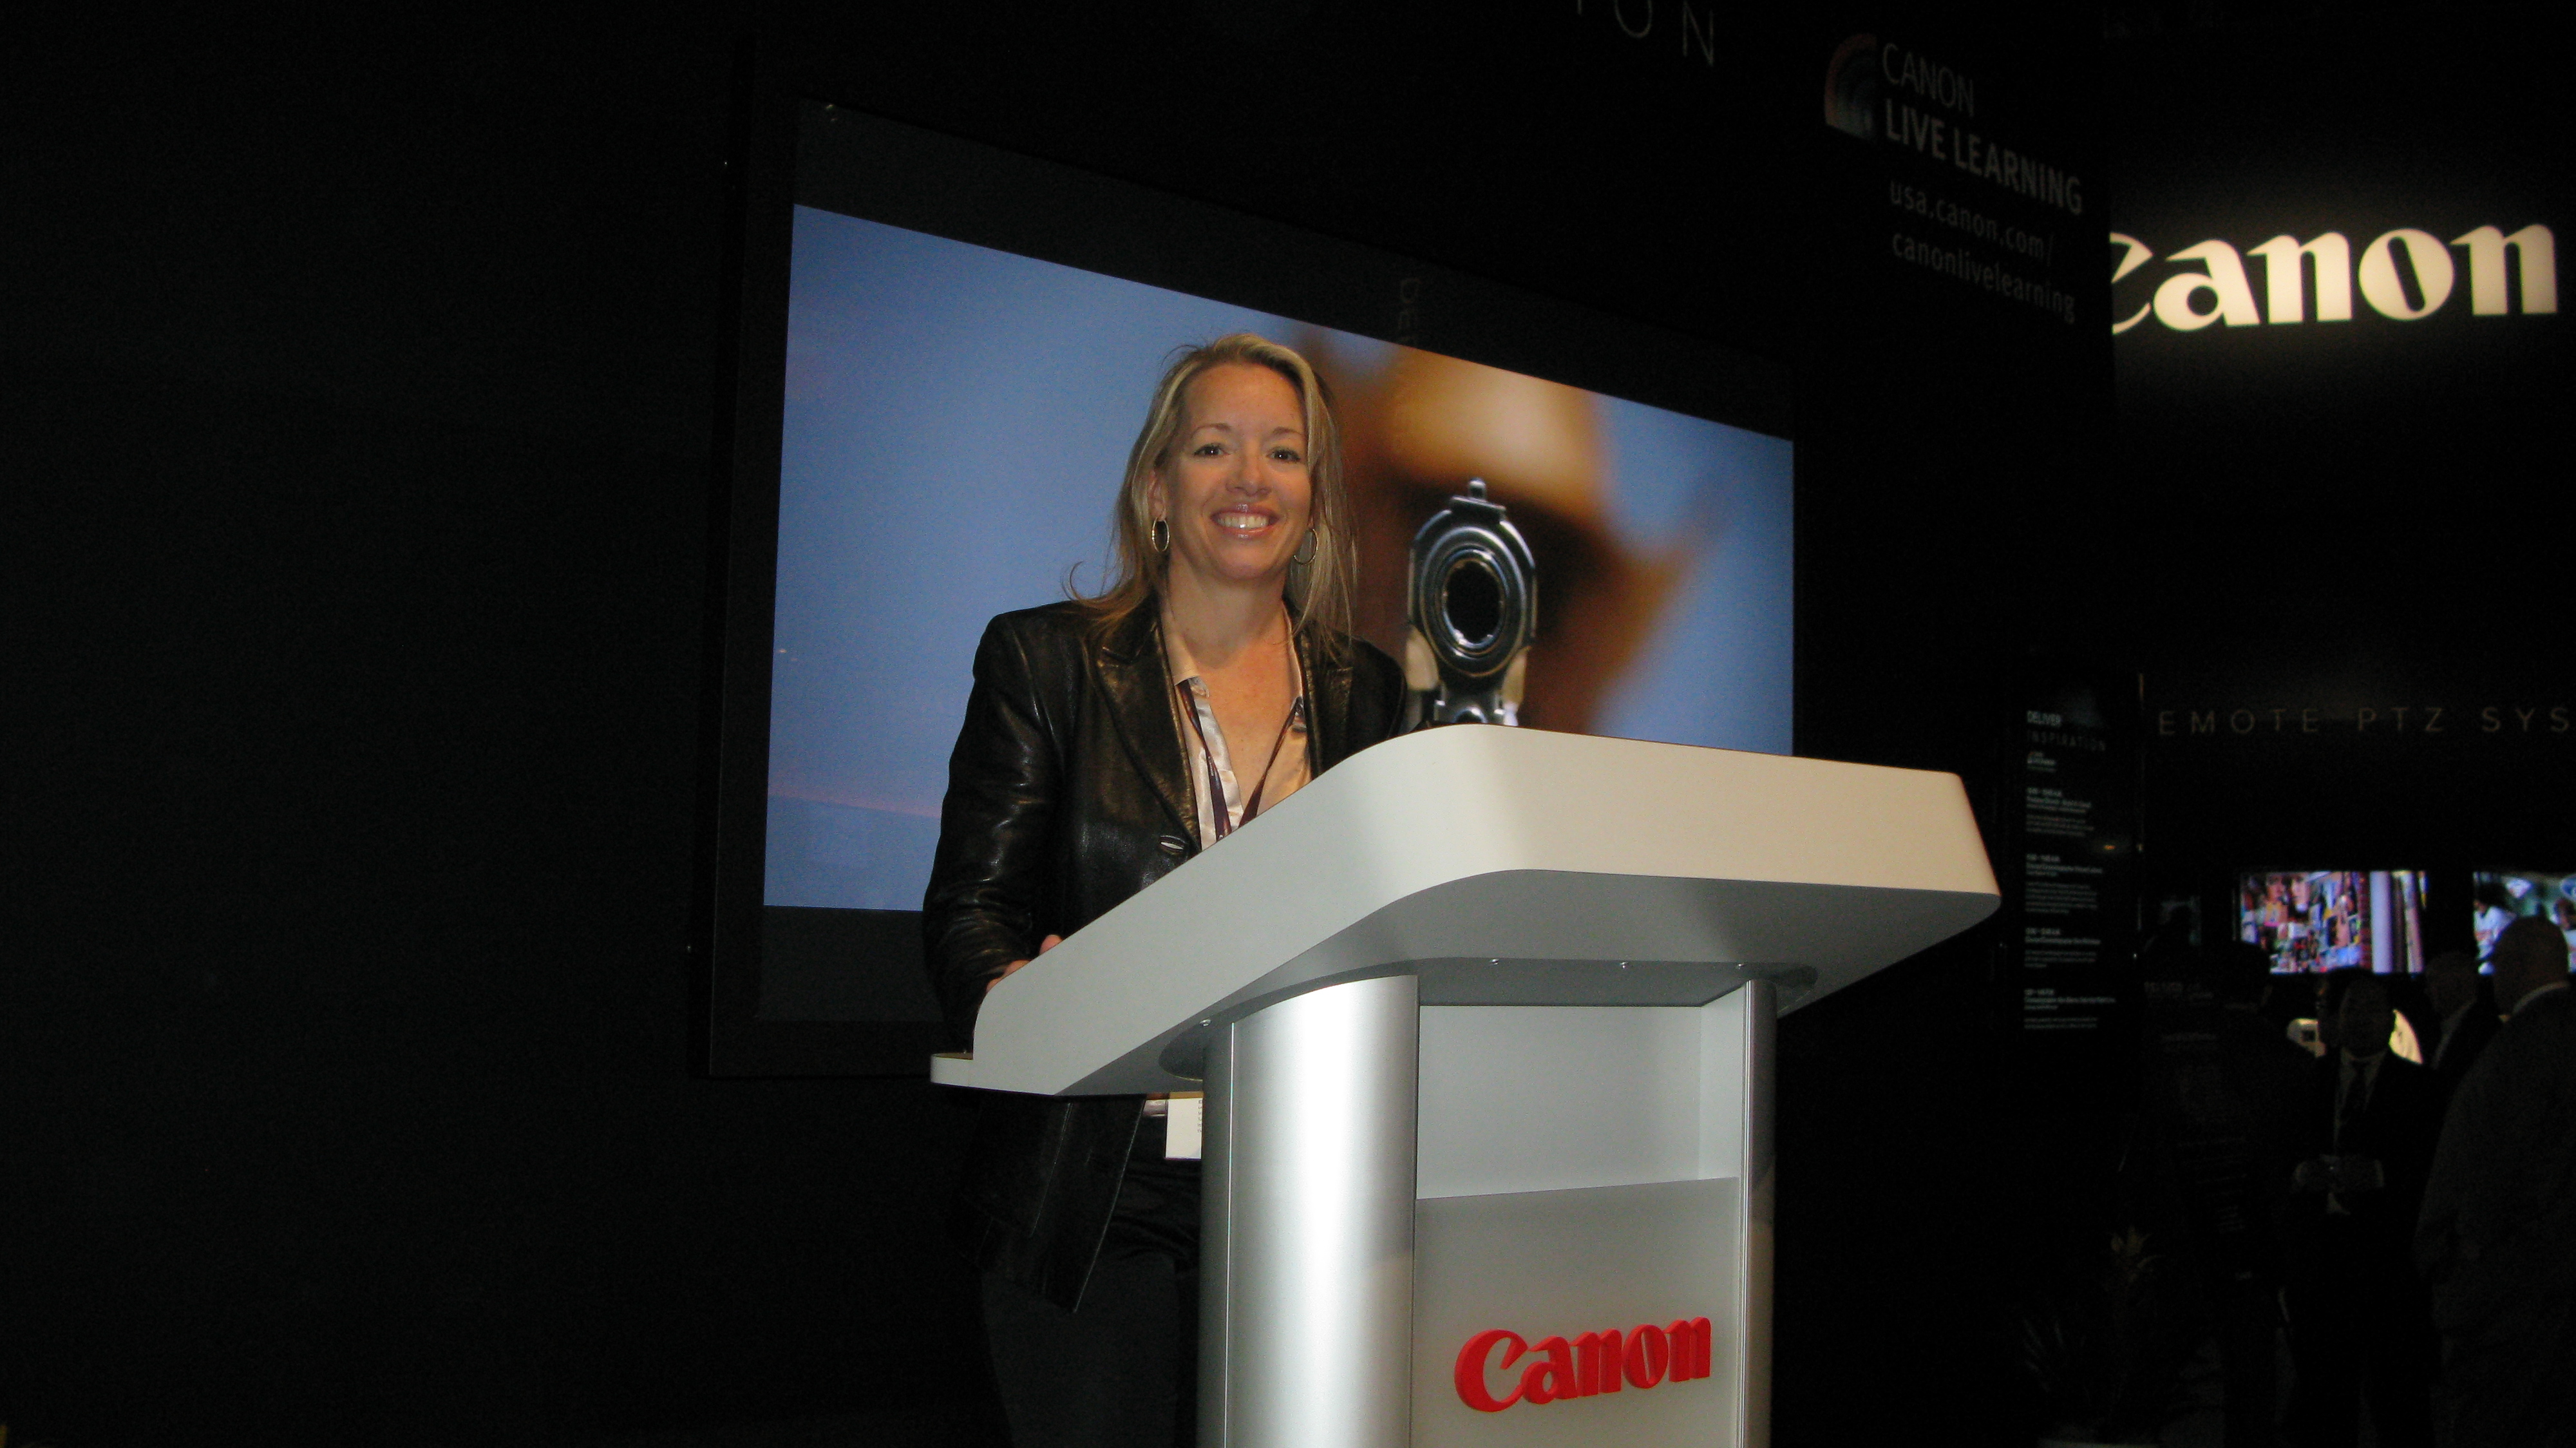 Canon USA-Live Learning Stage